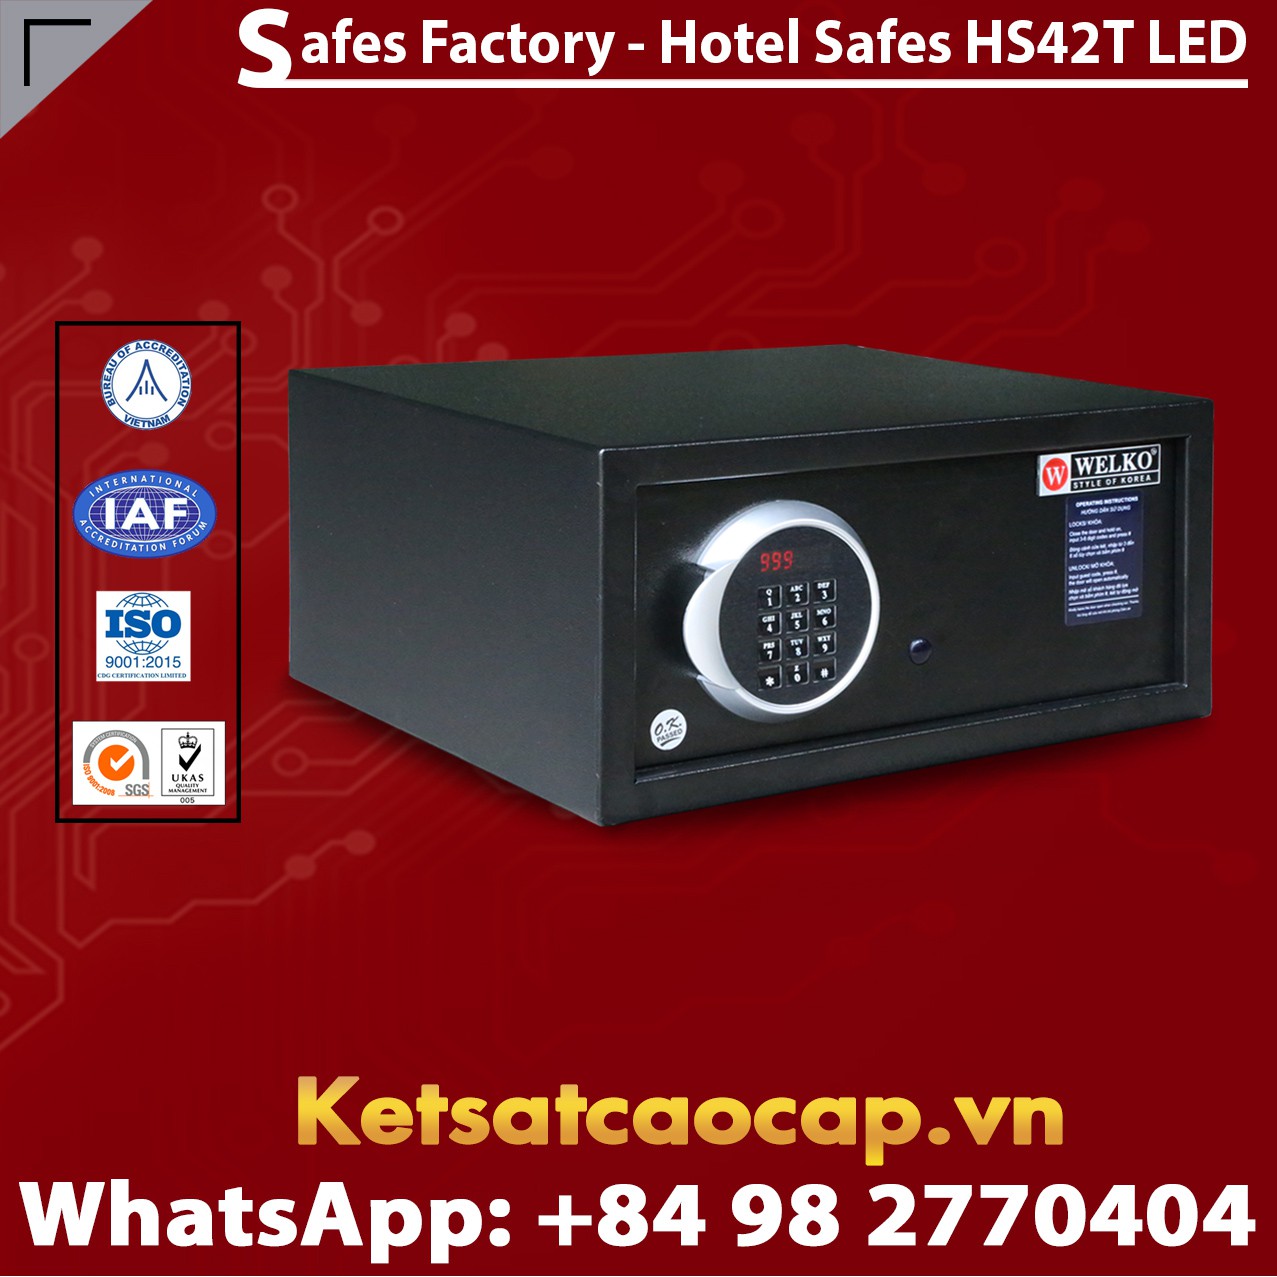 Safes For Hotels And Resorts